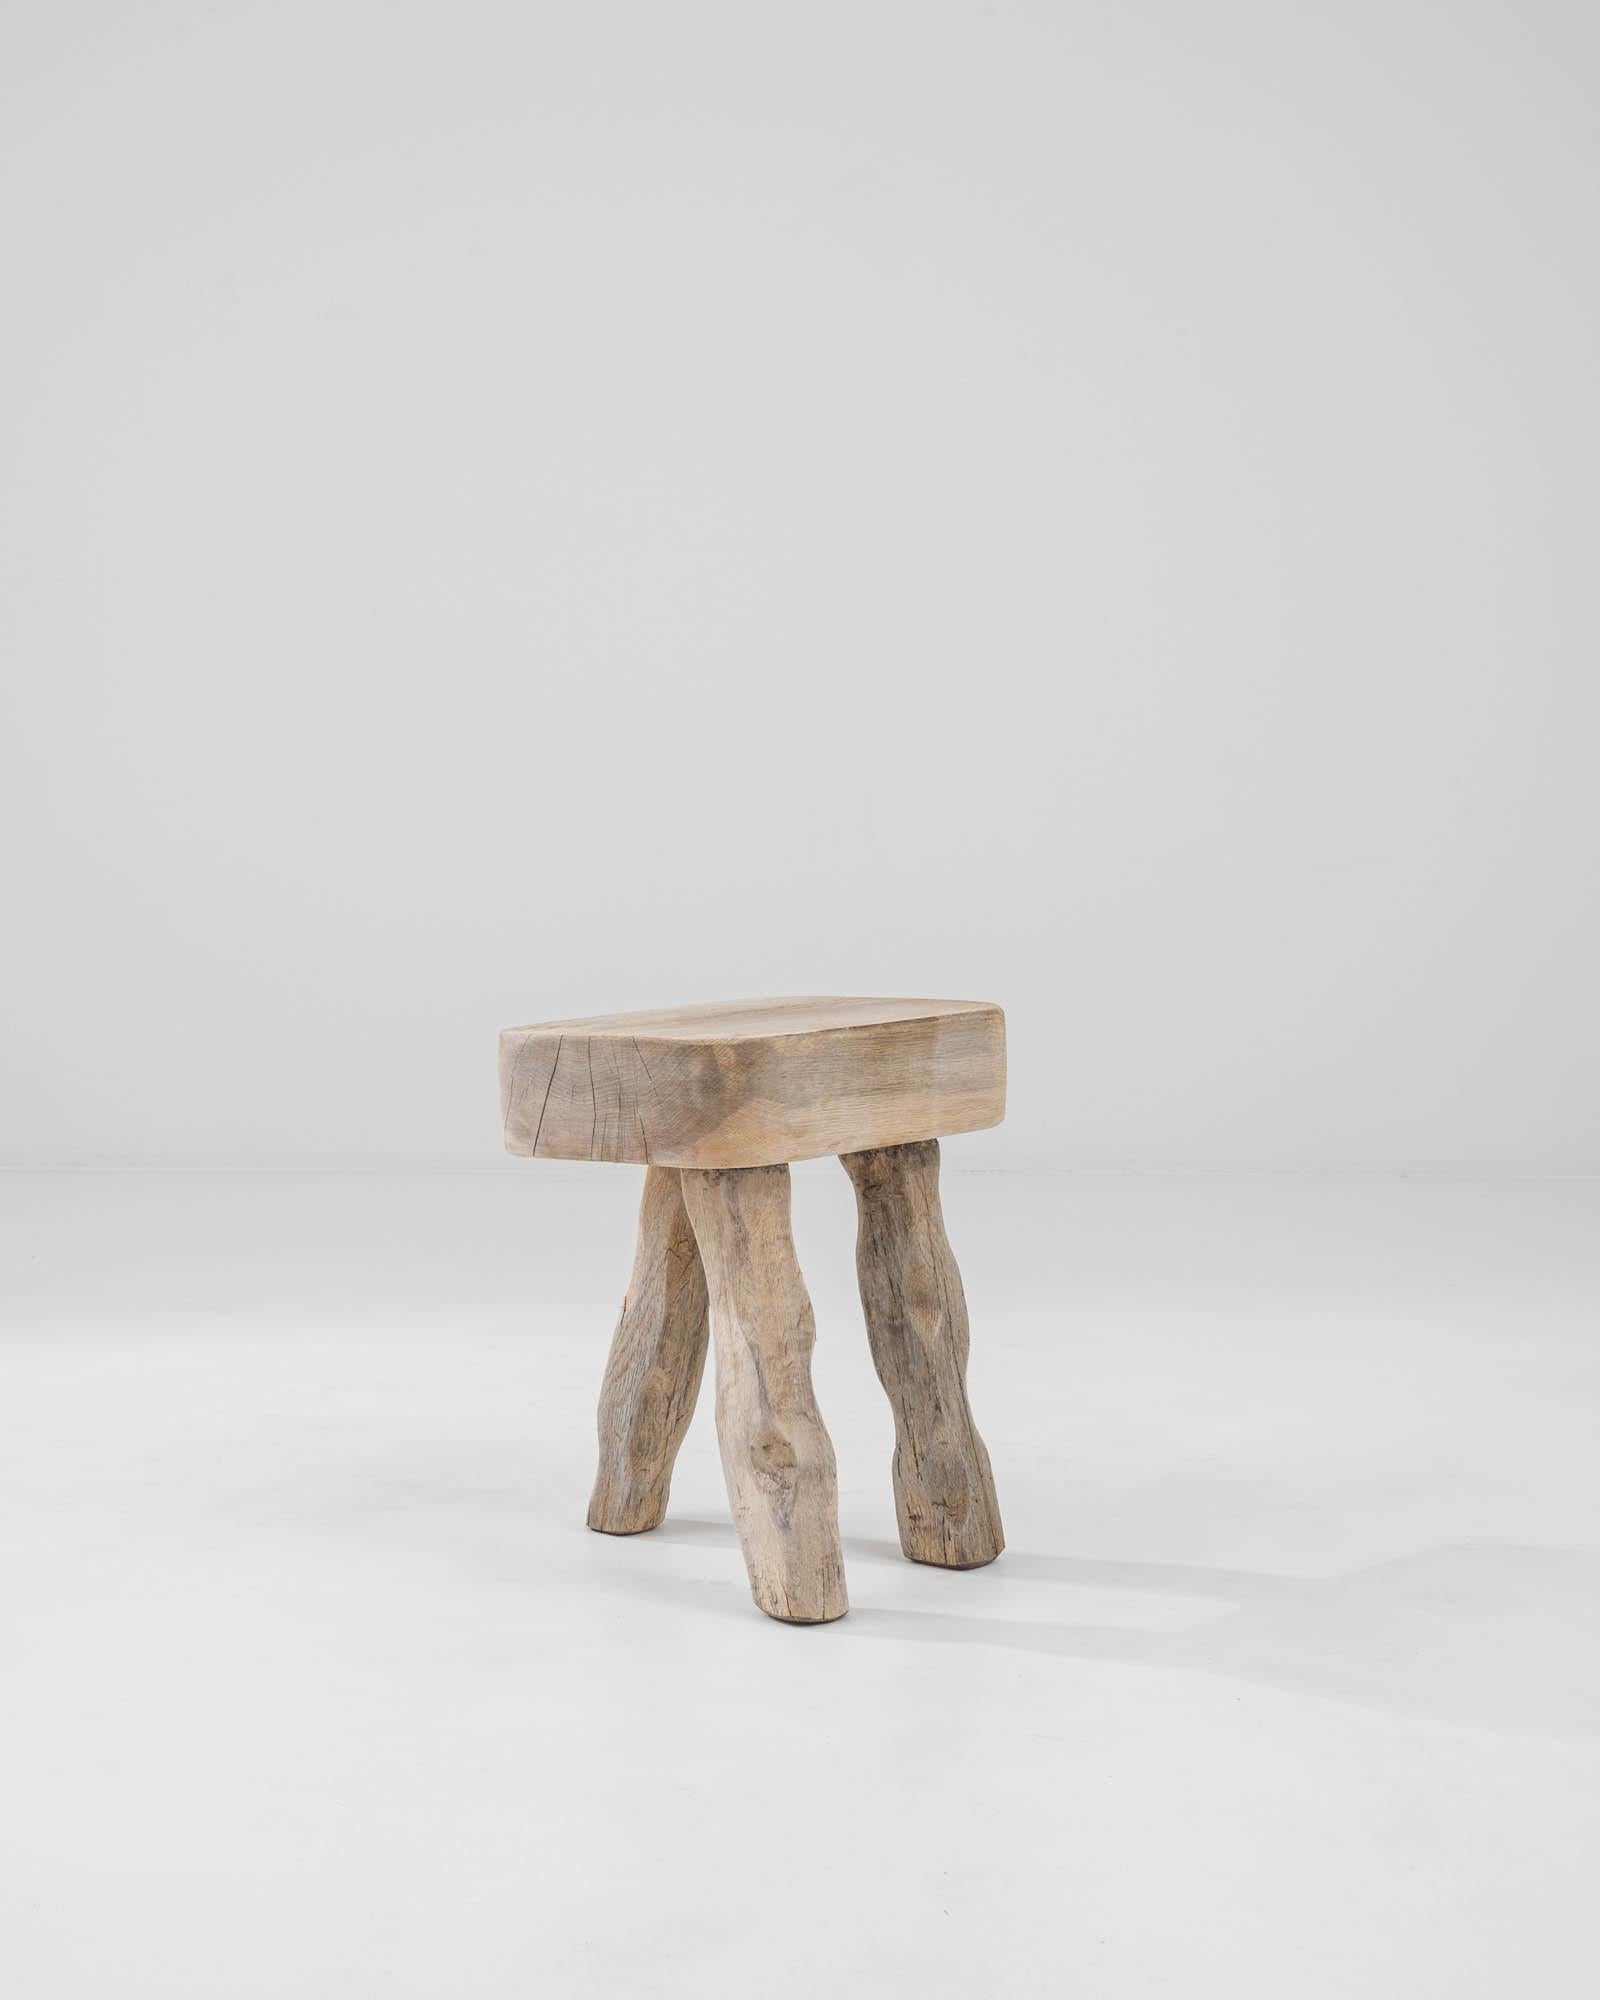 A wooden stool created in 1900s France. Simple, rustic, and yet surprisingly elegant, this curious stool radiates with one of a kind charm. A tripod of gently carved legs offsets the stool just so, giving almost the appearance of a creature